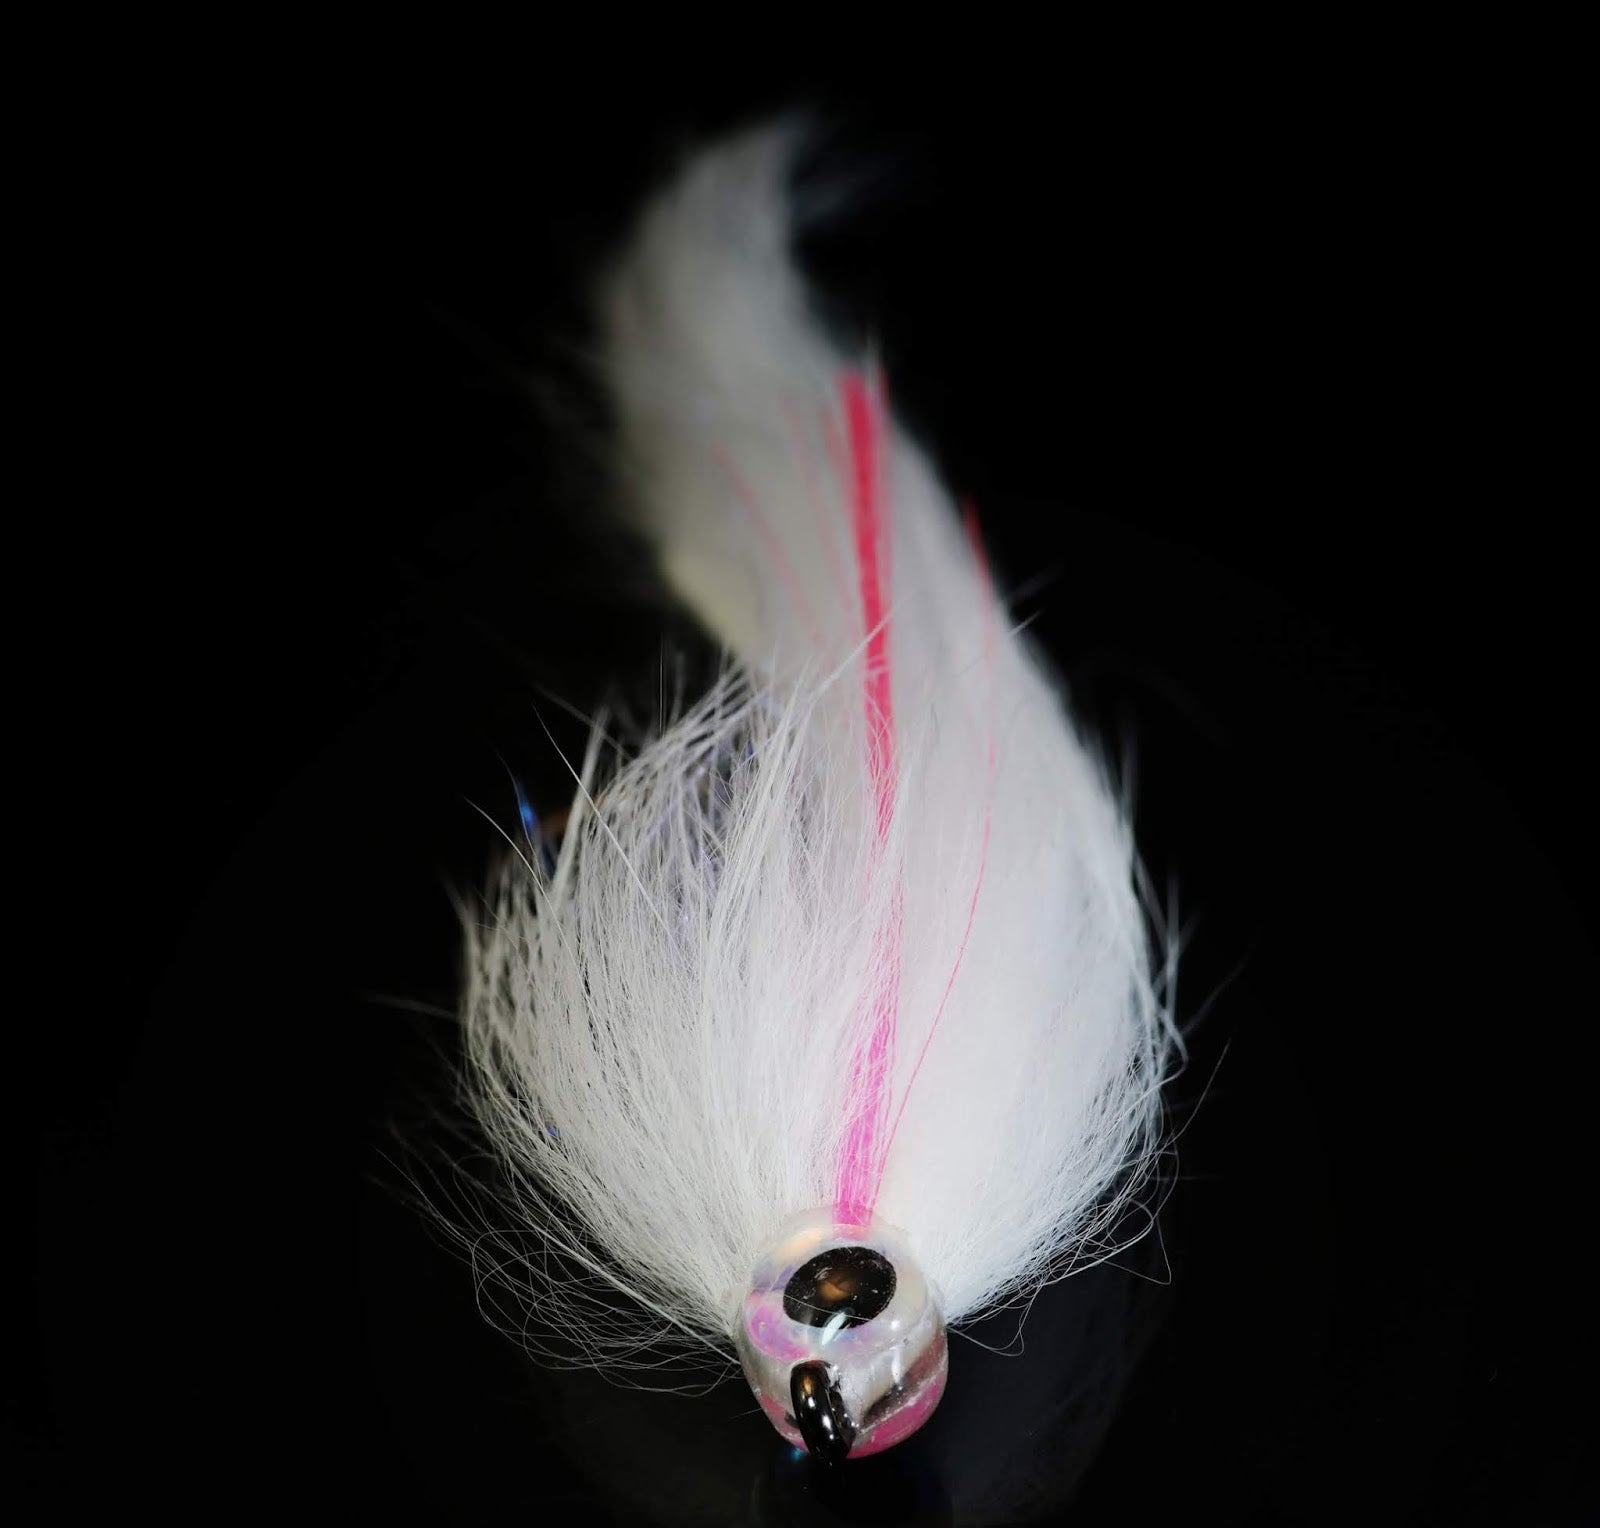 Mohair Synthetic Dubbing Line  Fly Fishing Trout Streamers